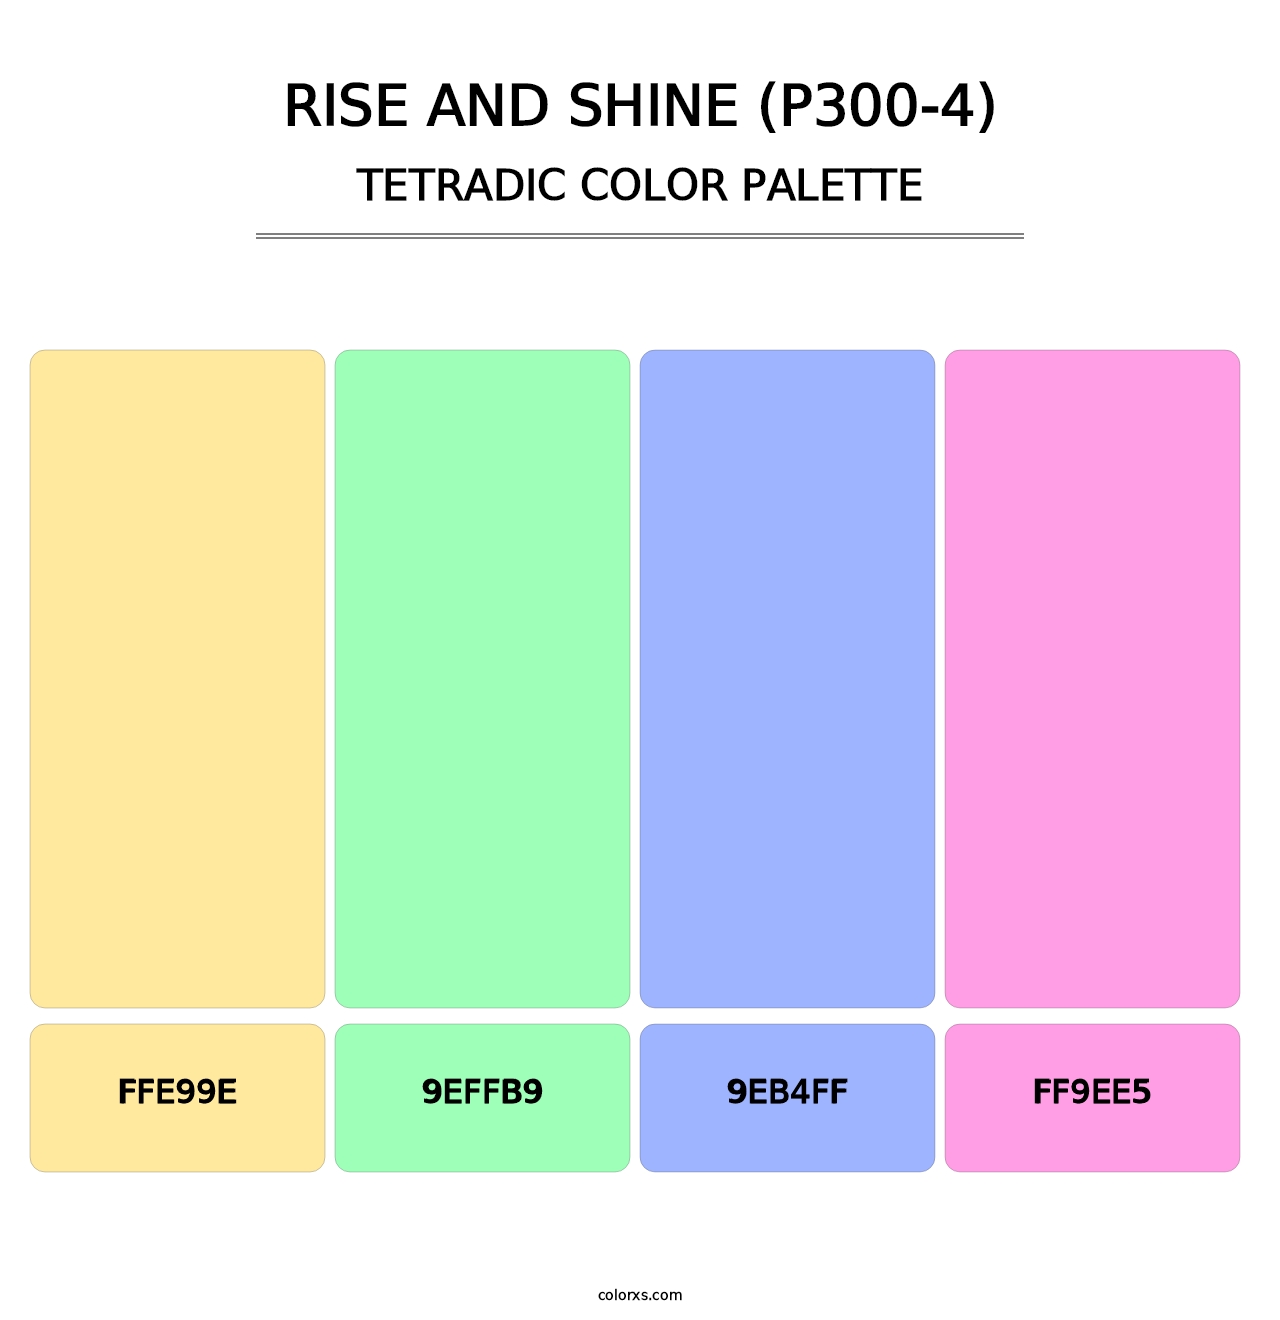 Rise And Shine (P300-4) - Tetradic Color Palette